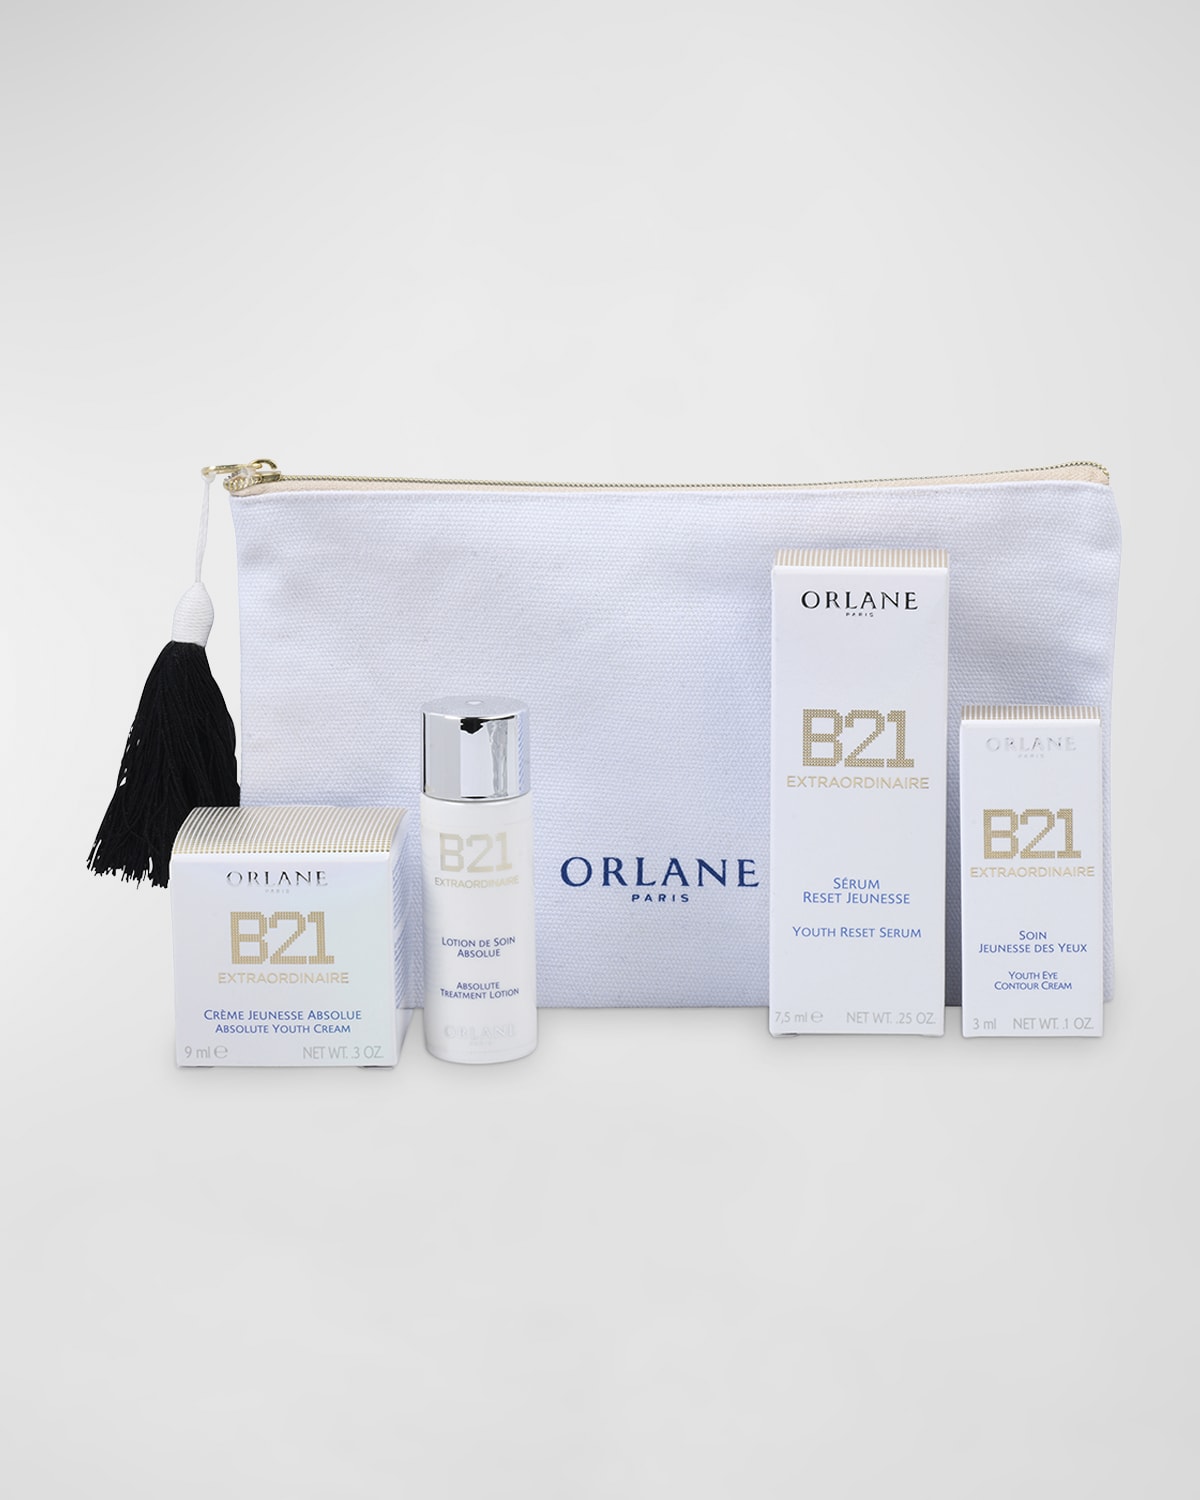 B21 Extraordinaire Essentials Set, Yours with any $275 Orlane Order